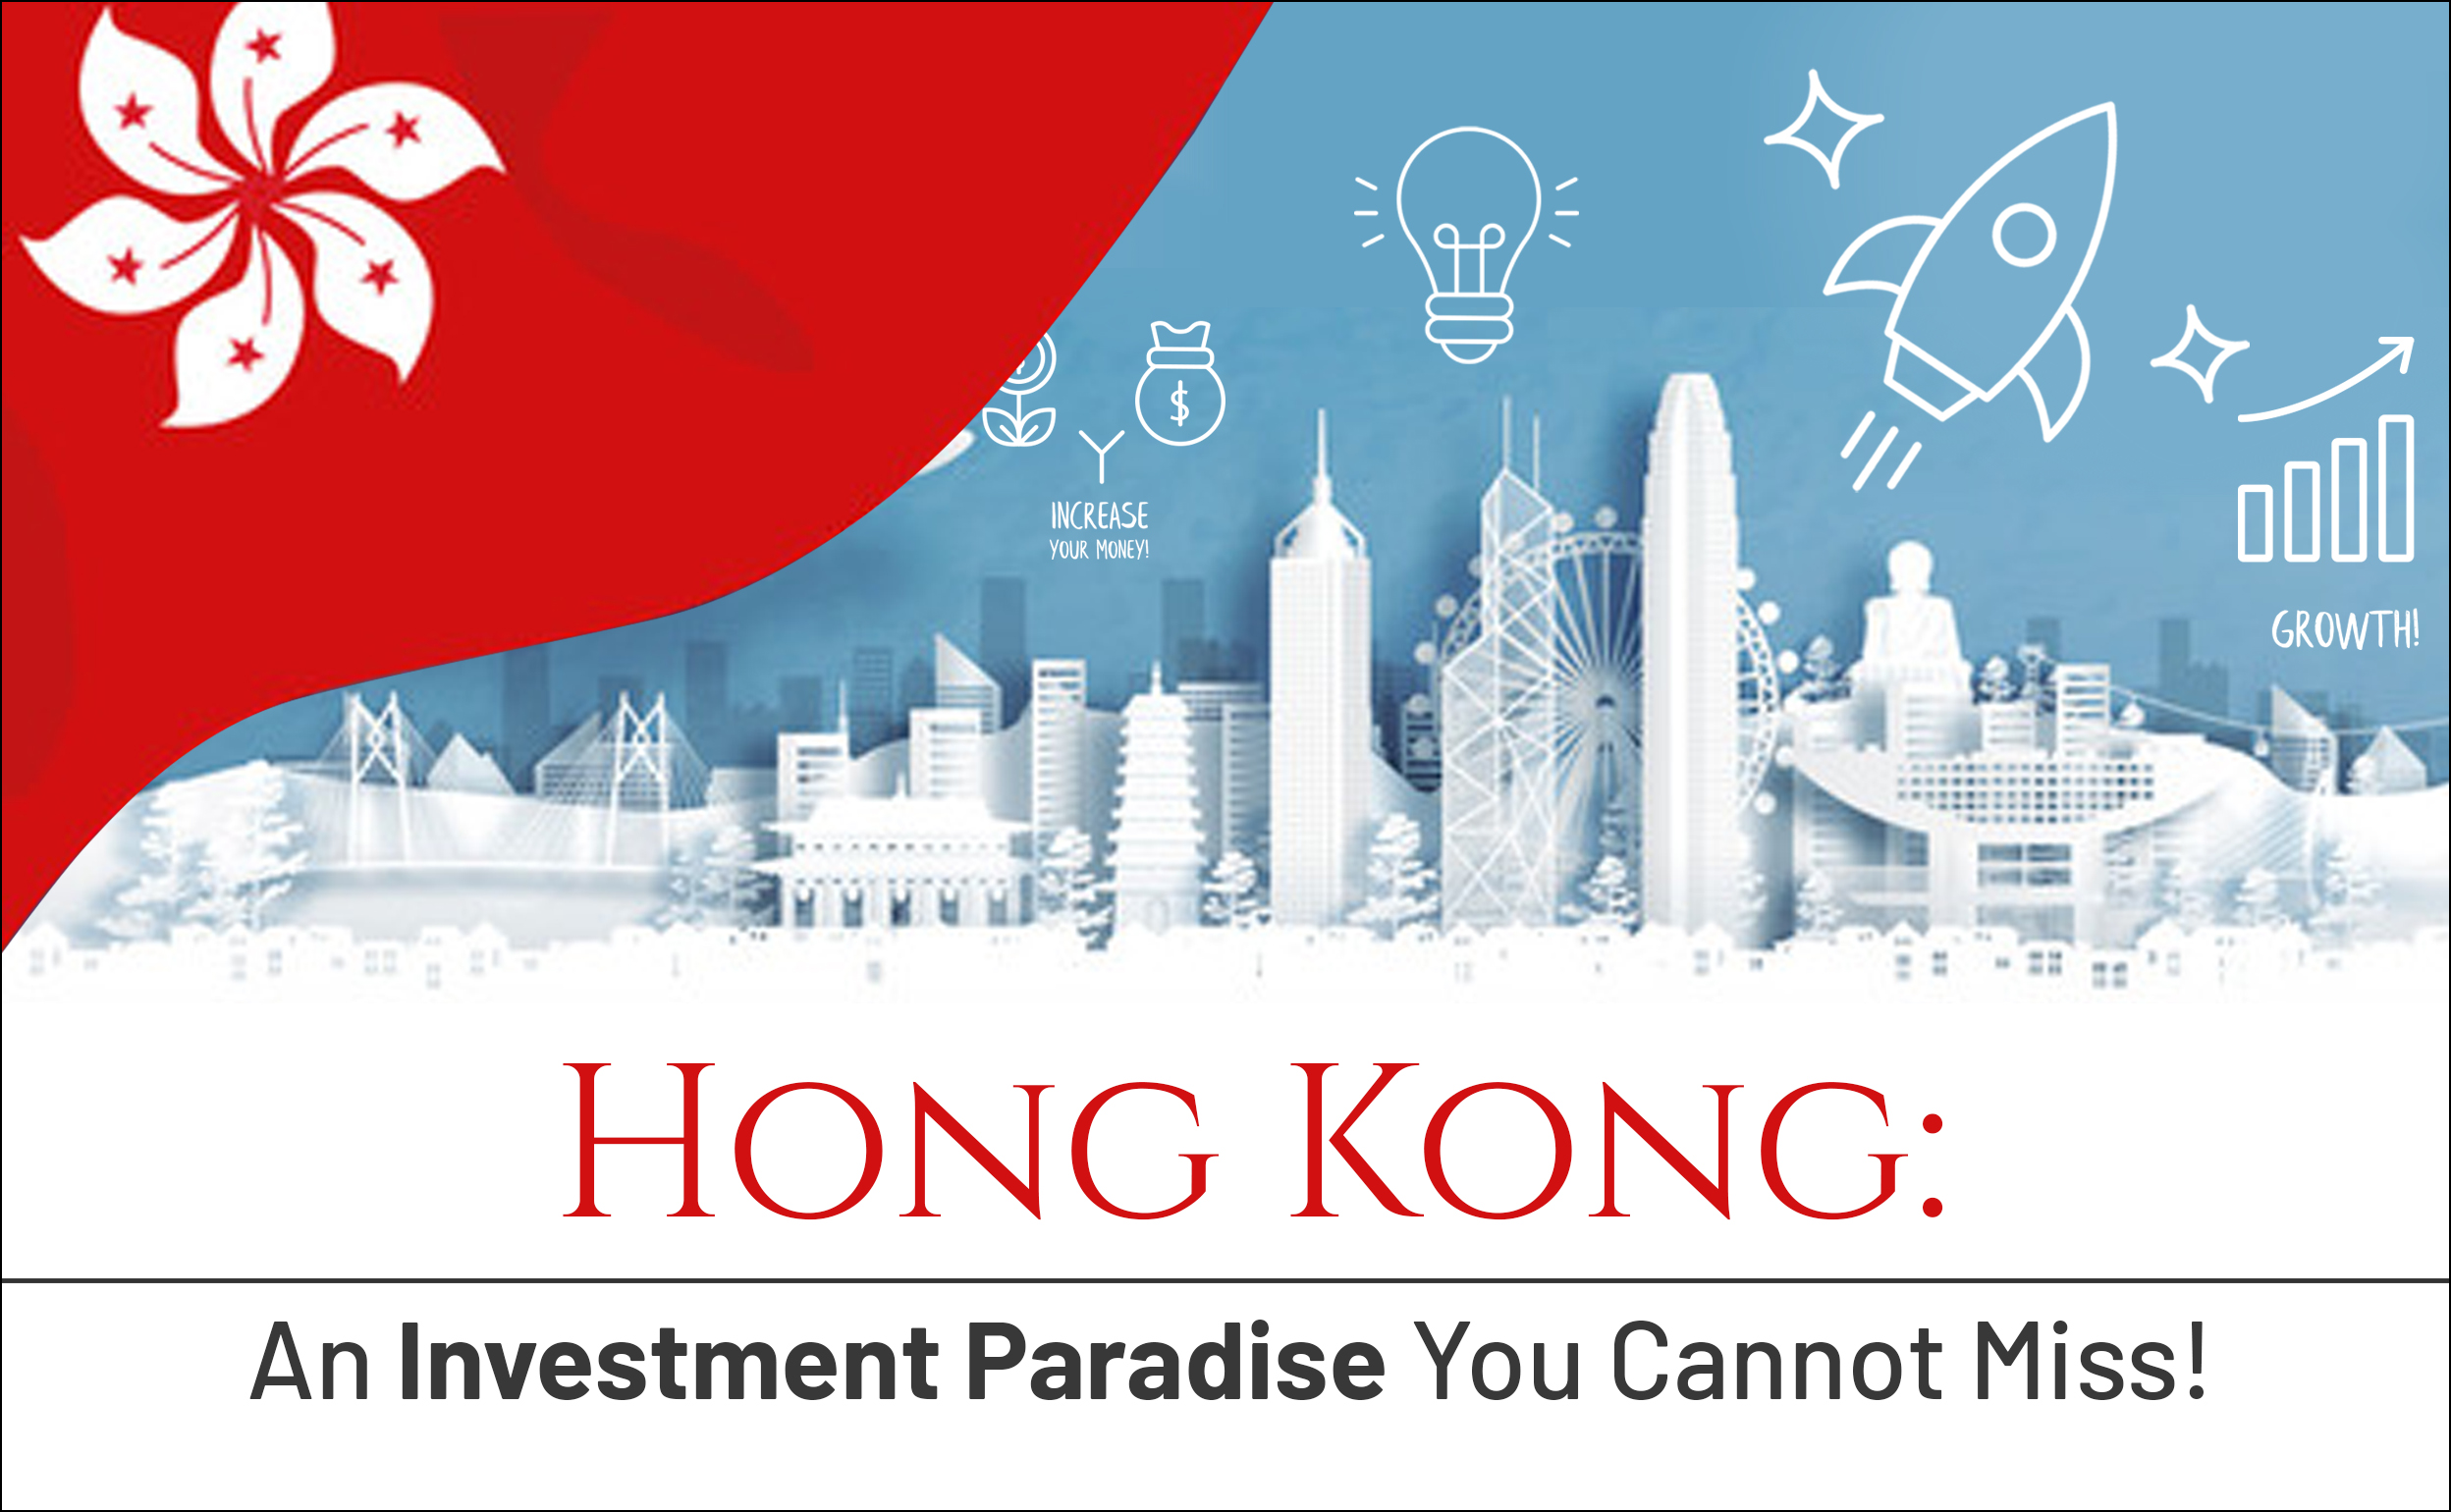 Hong Kong: An Investment Paradise You Cannot Miss!